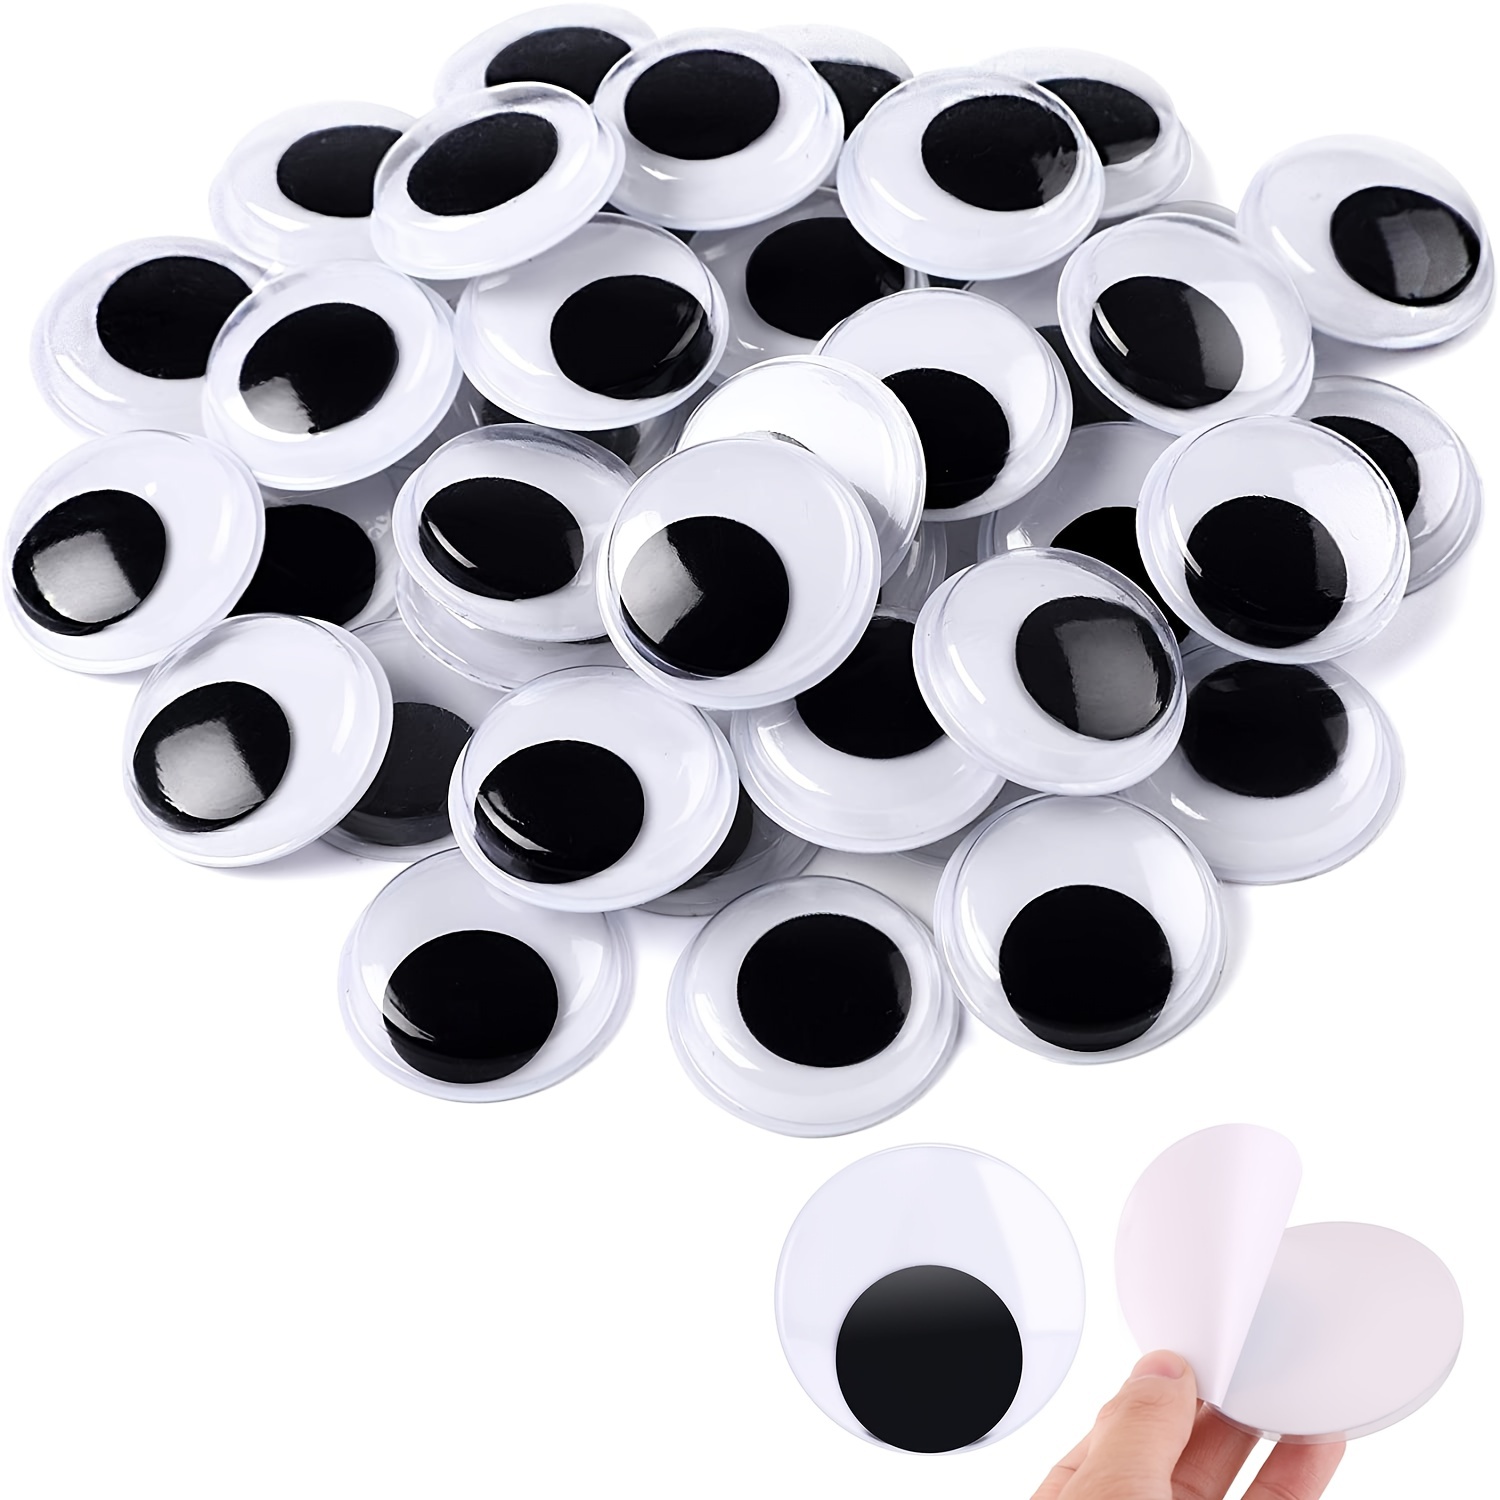 Small Googly Eyes Self Adhesive Sticker, Black, 1/2-Inch, 50-Count